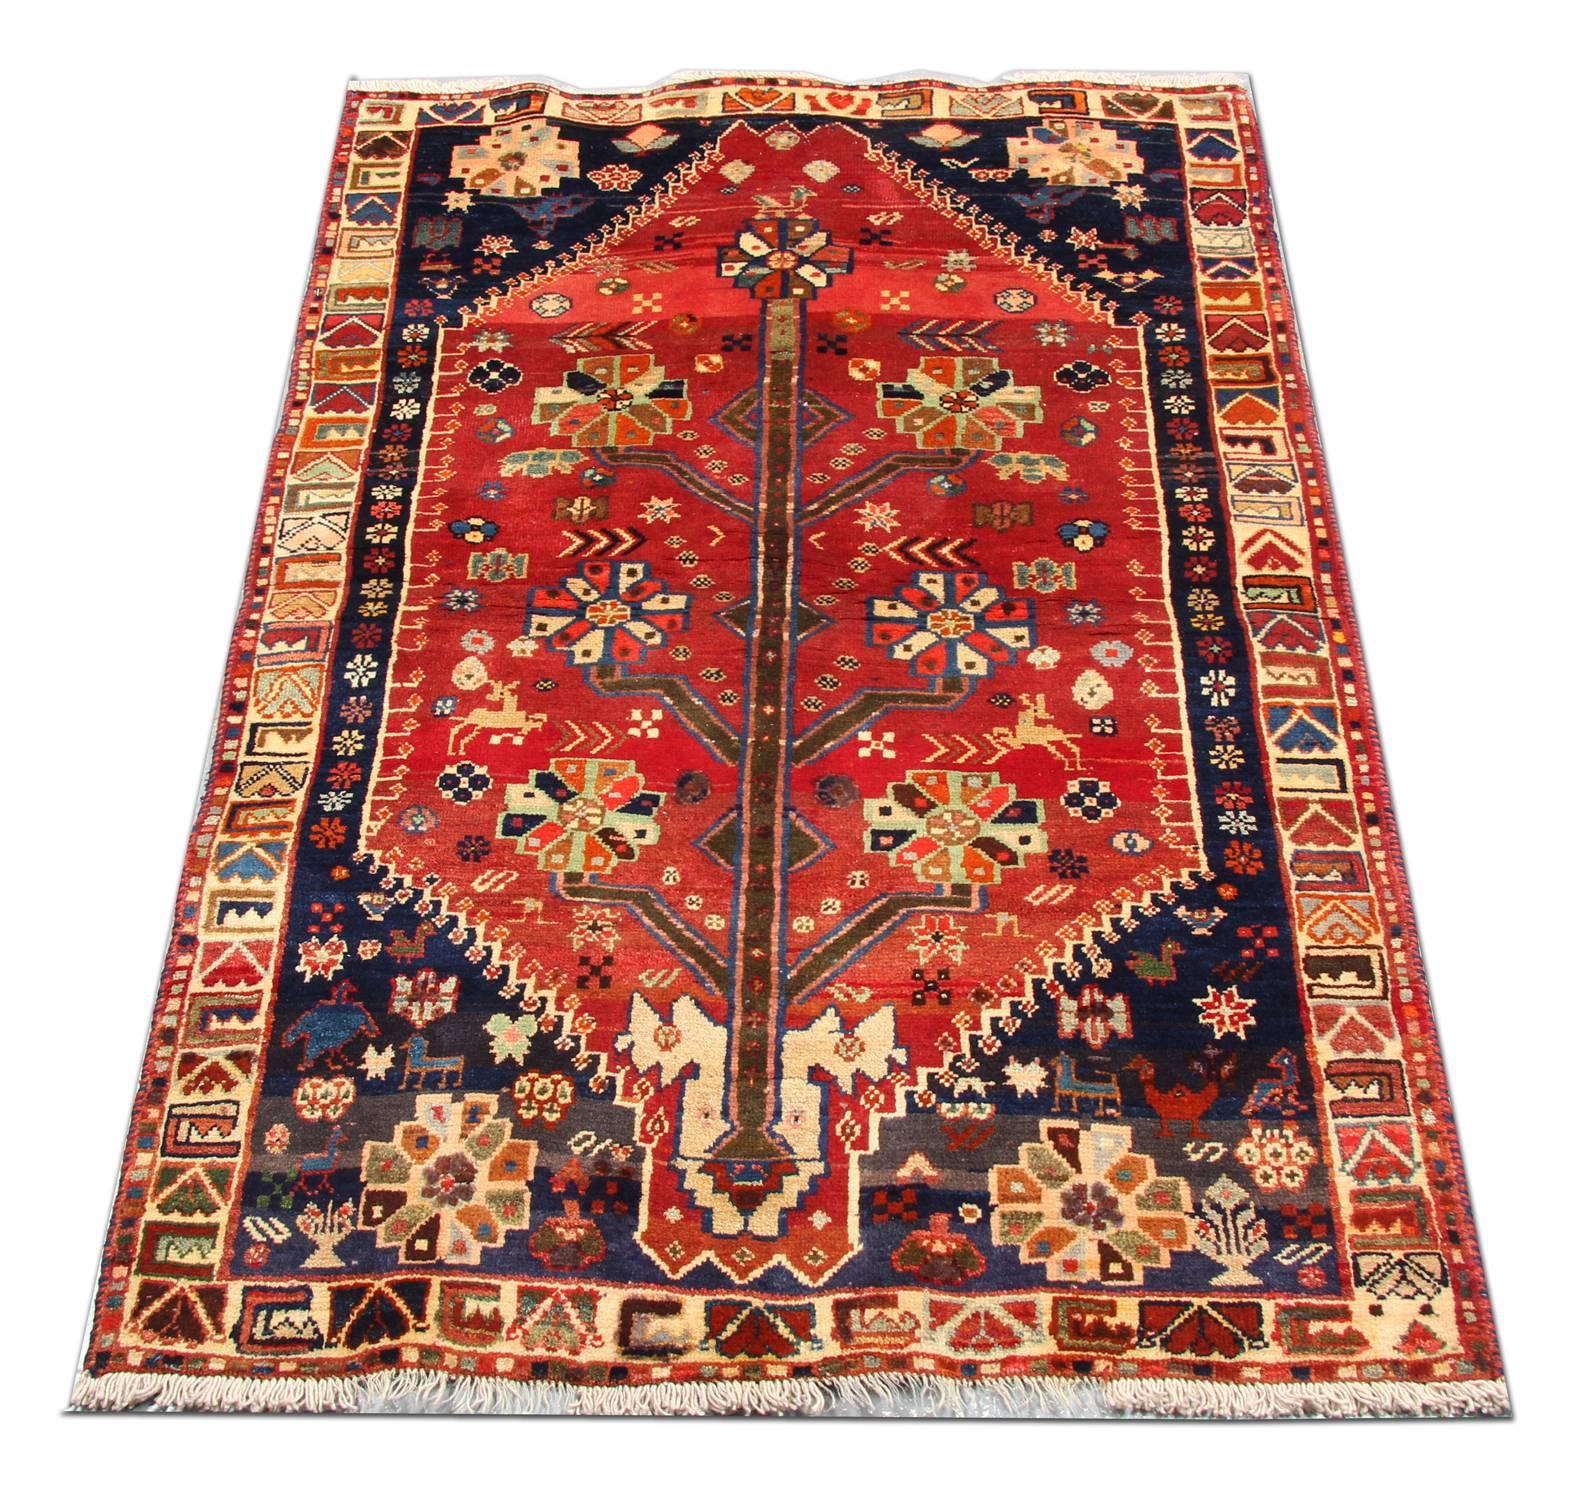 This beautiful rug features an all-over design. Woven with a great level of detail and a fantastic colour pallet. The central design features a tree with floral emblems and motifs are woven throughout. This oriental rug design is then enclosed by